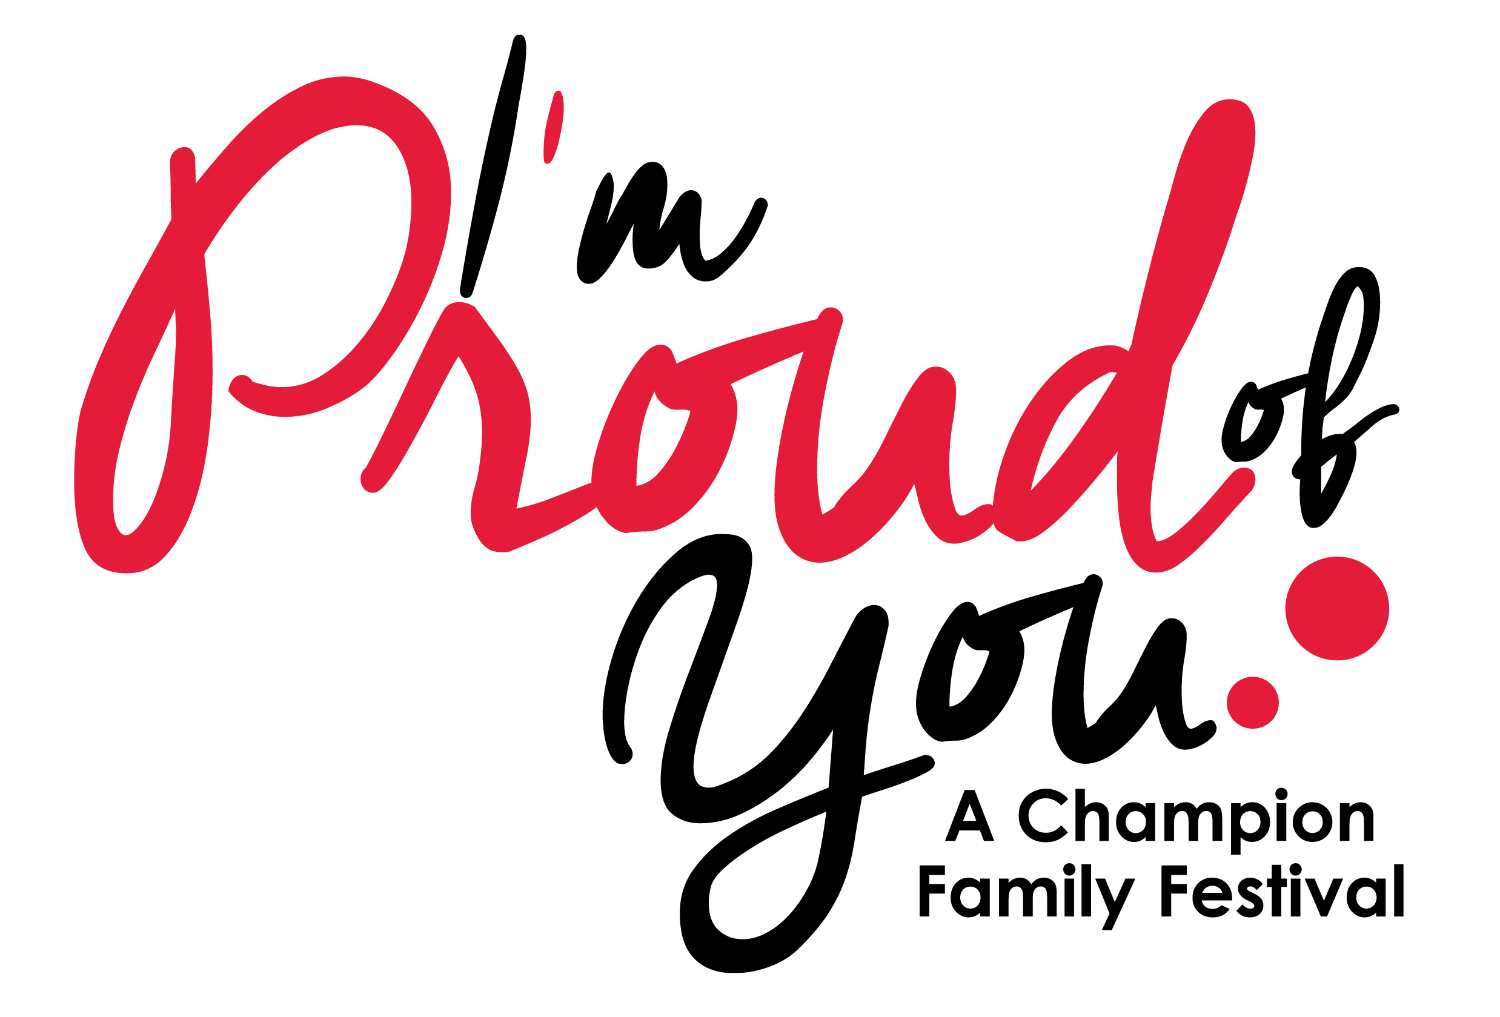 Proud Logo - I am Proud of You Day | Family Festival | Kids Activities | Singapore